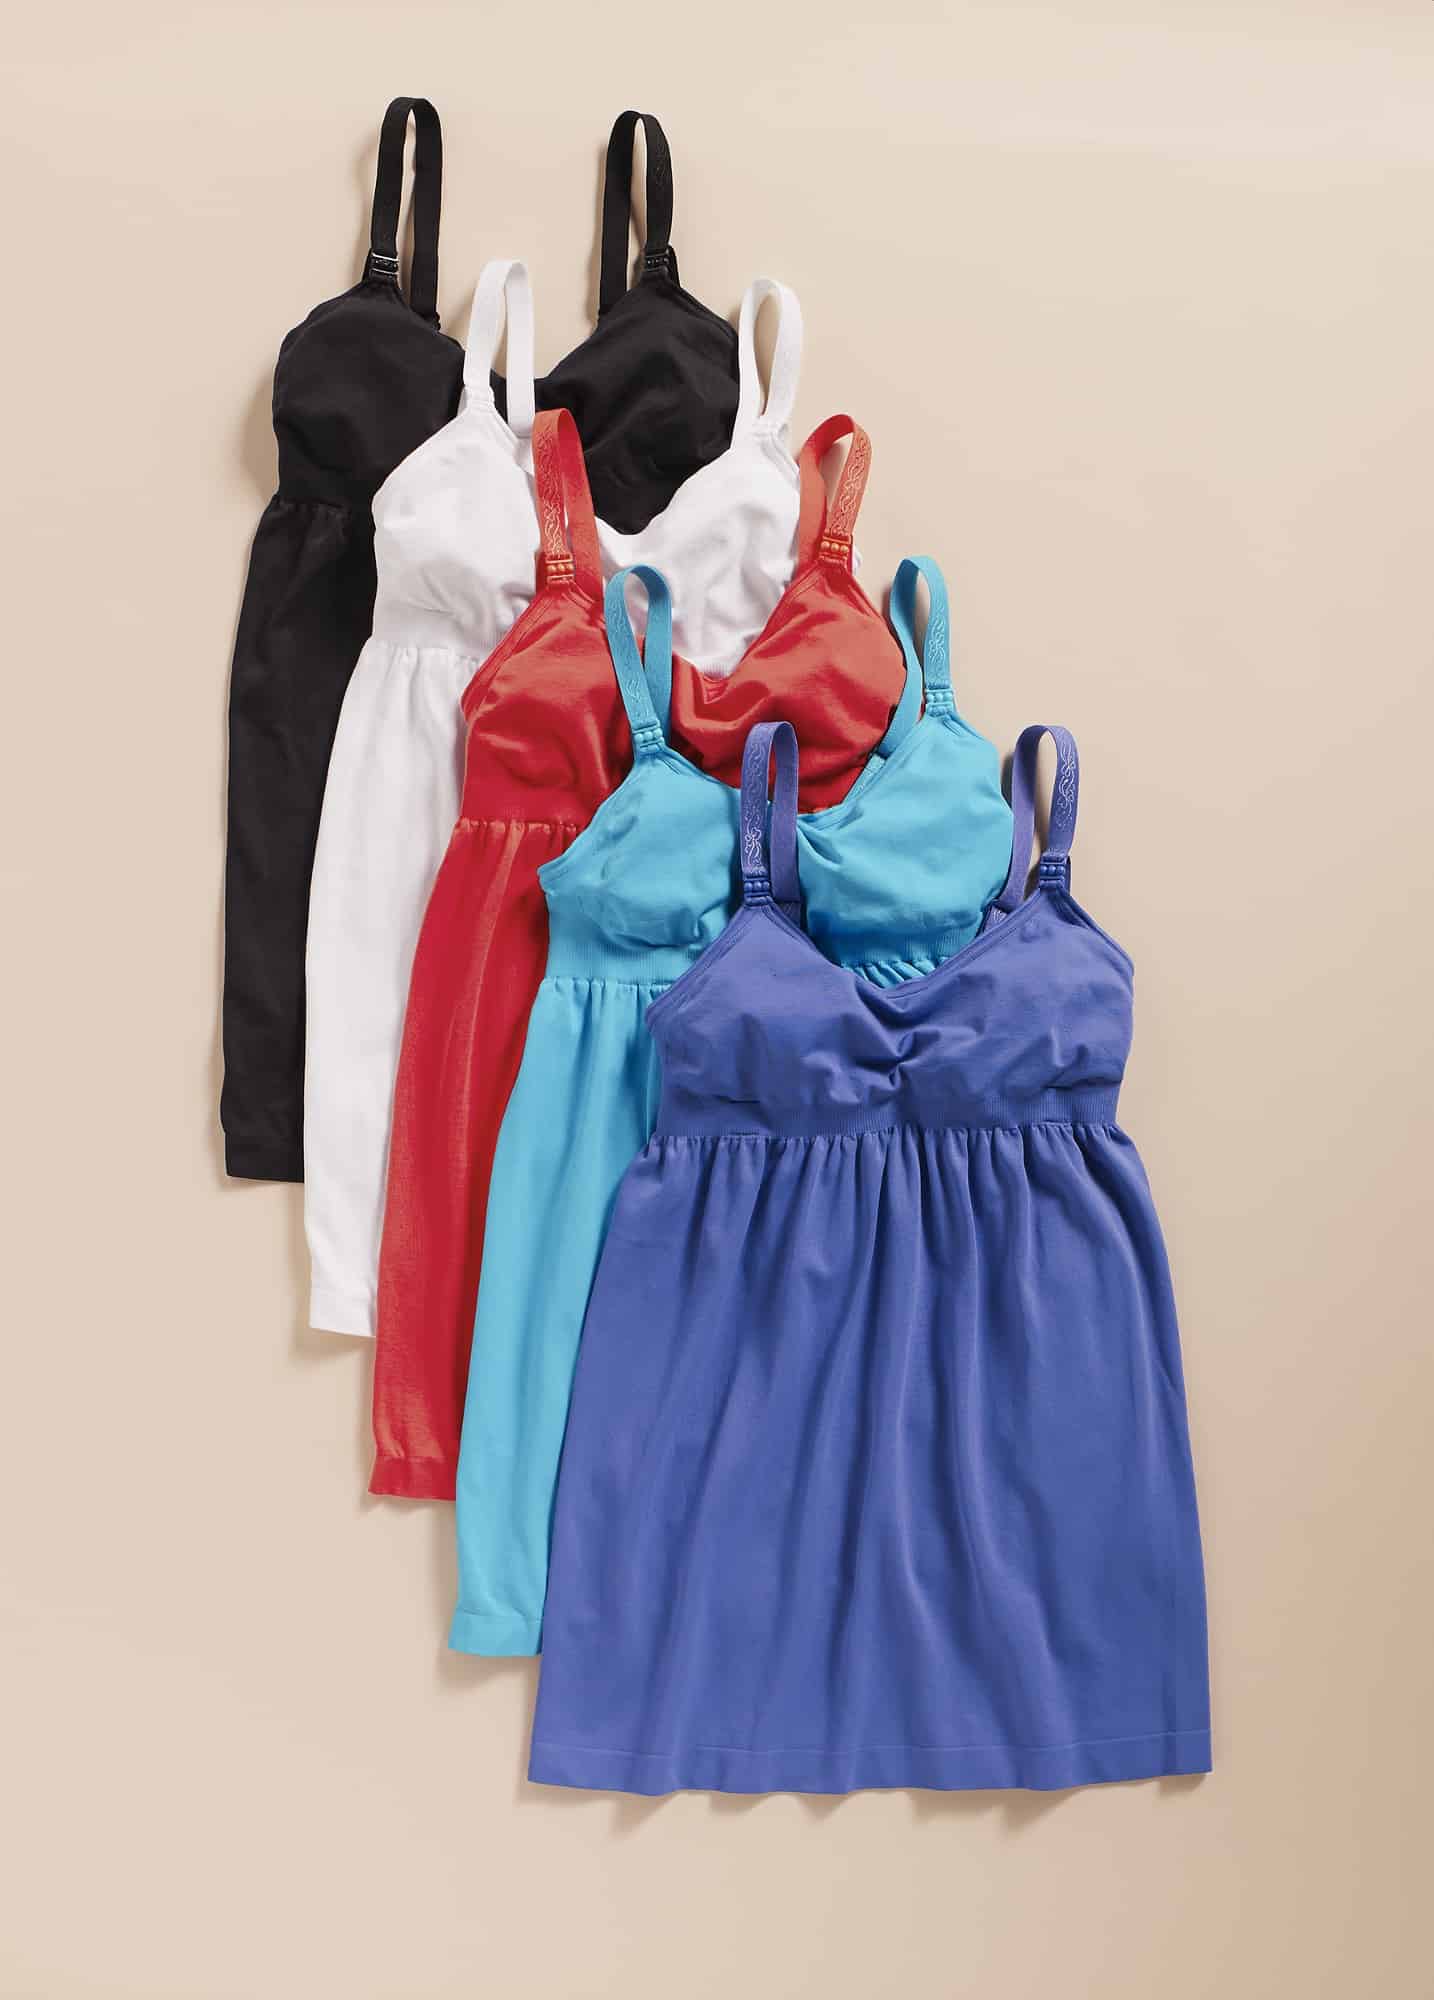 Selection of nursing and pregnancy tank tops